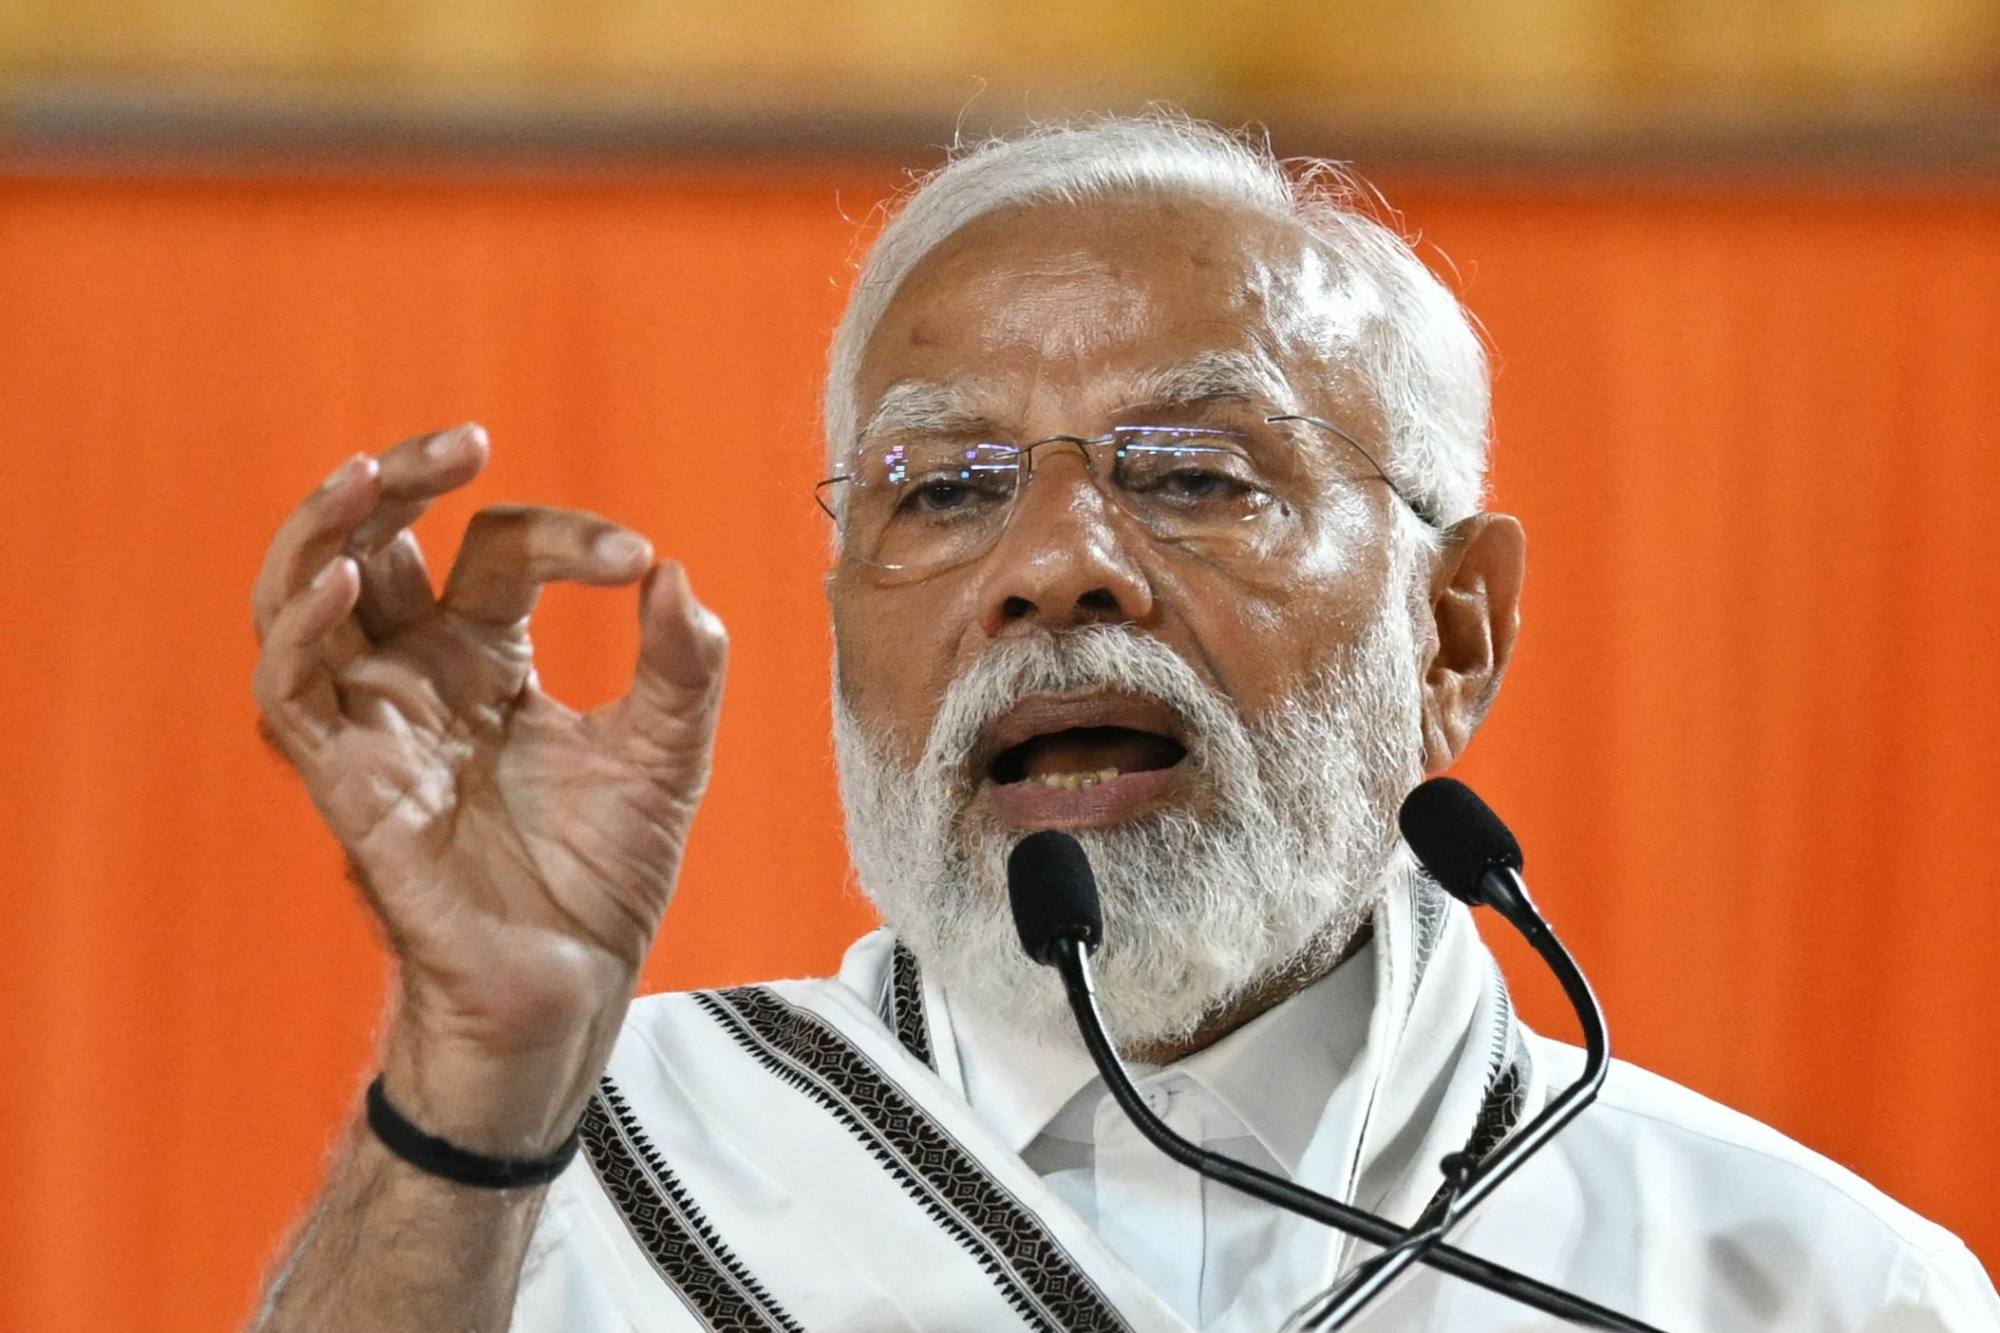 Indian Prime Minister Narendra Modi addresses a public meeting in Chennai earlier this month. He is set to make labour reforms a priority if re-elected this year, his party says. Photo: AFP